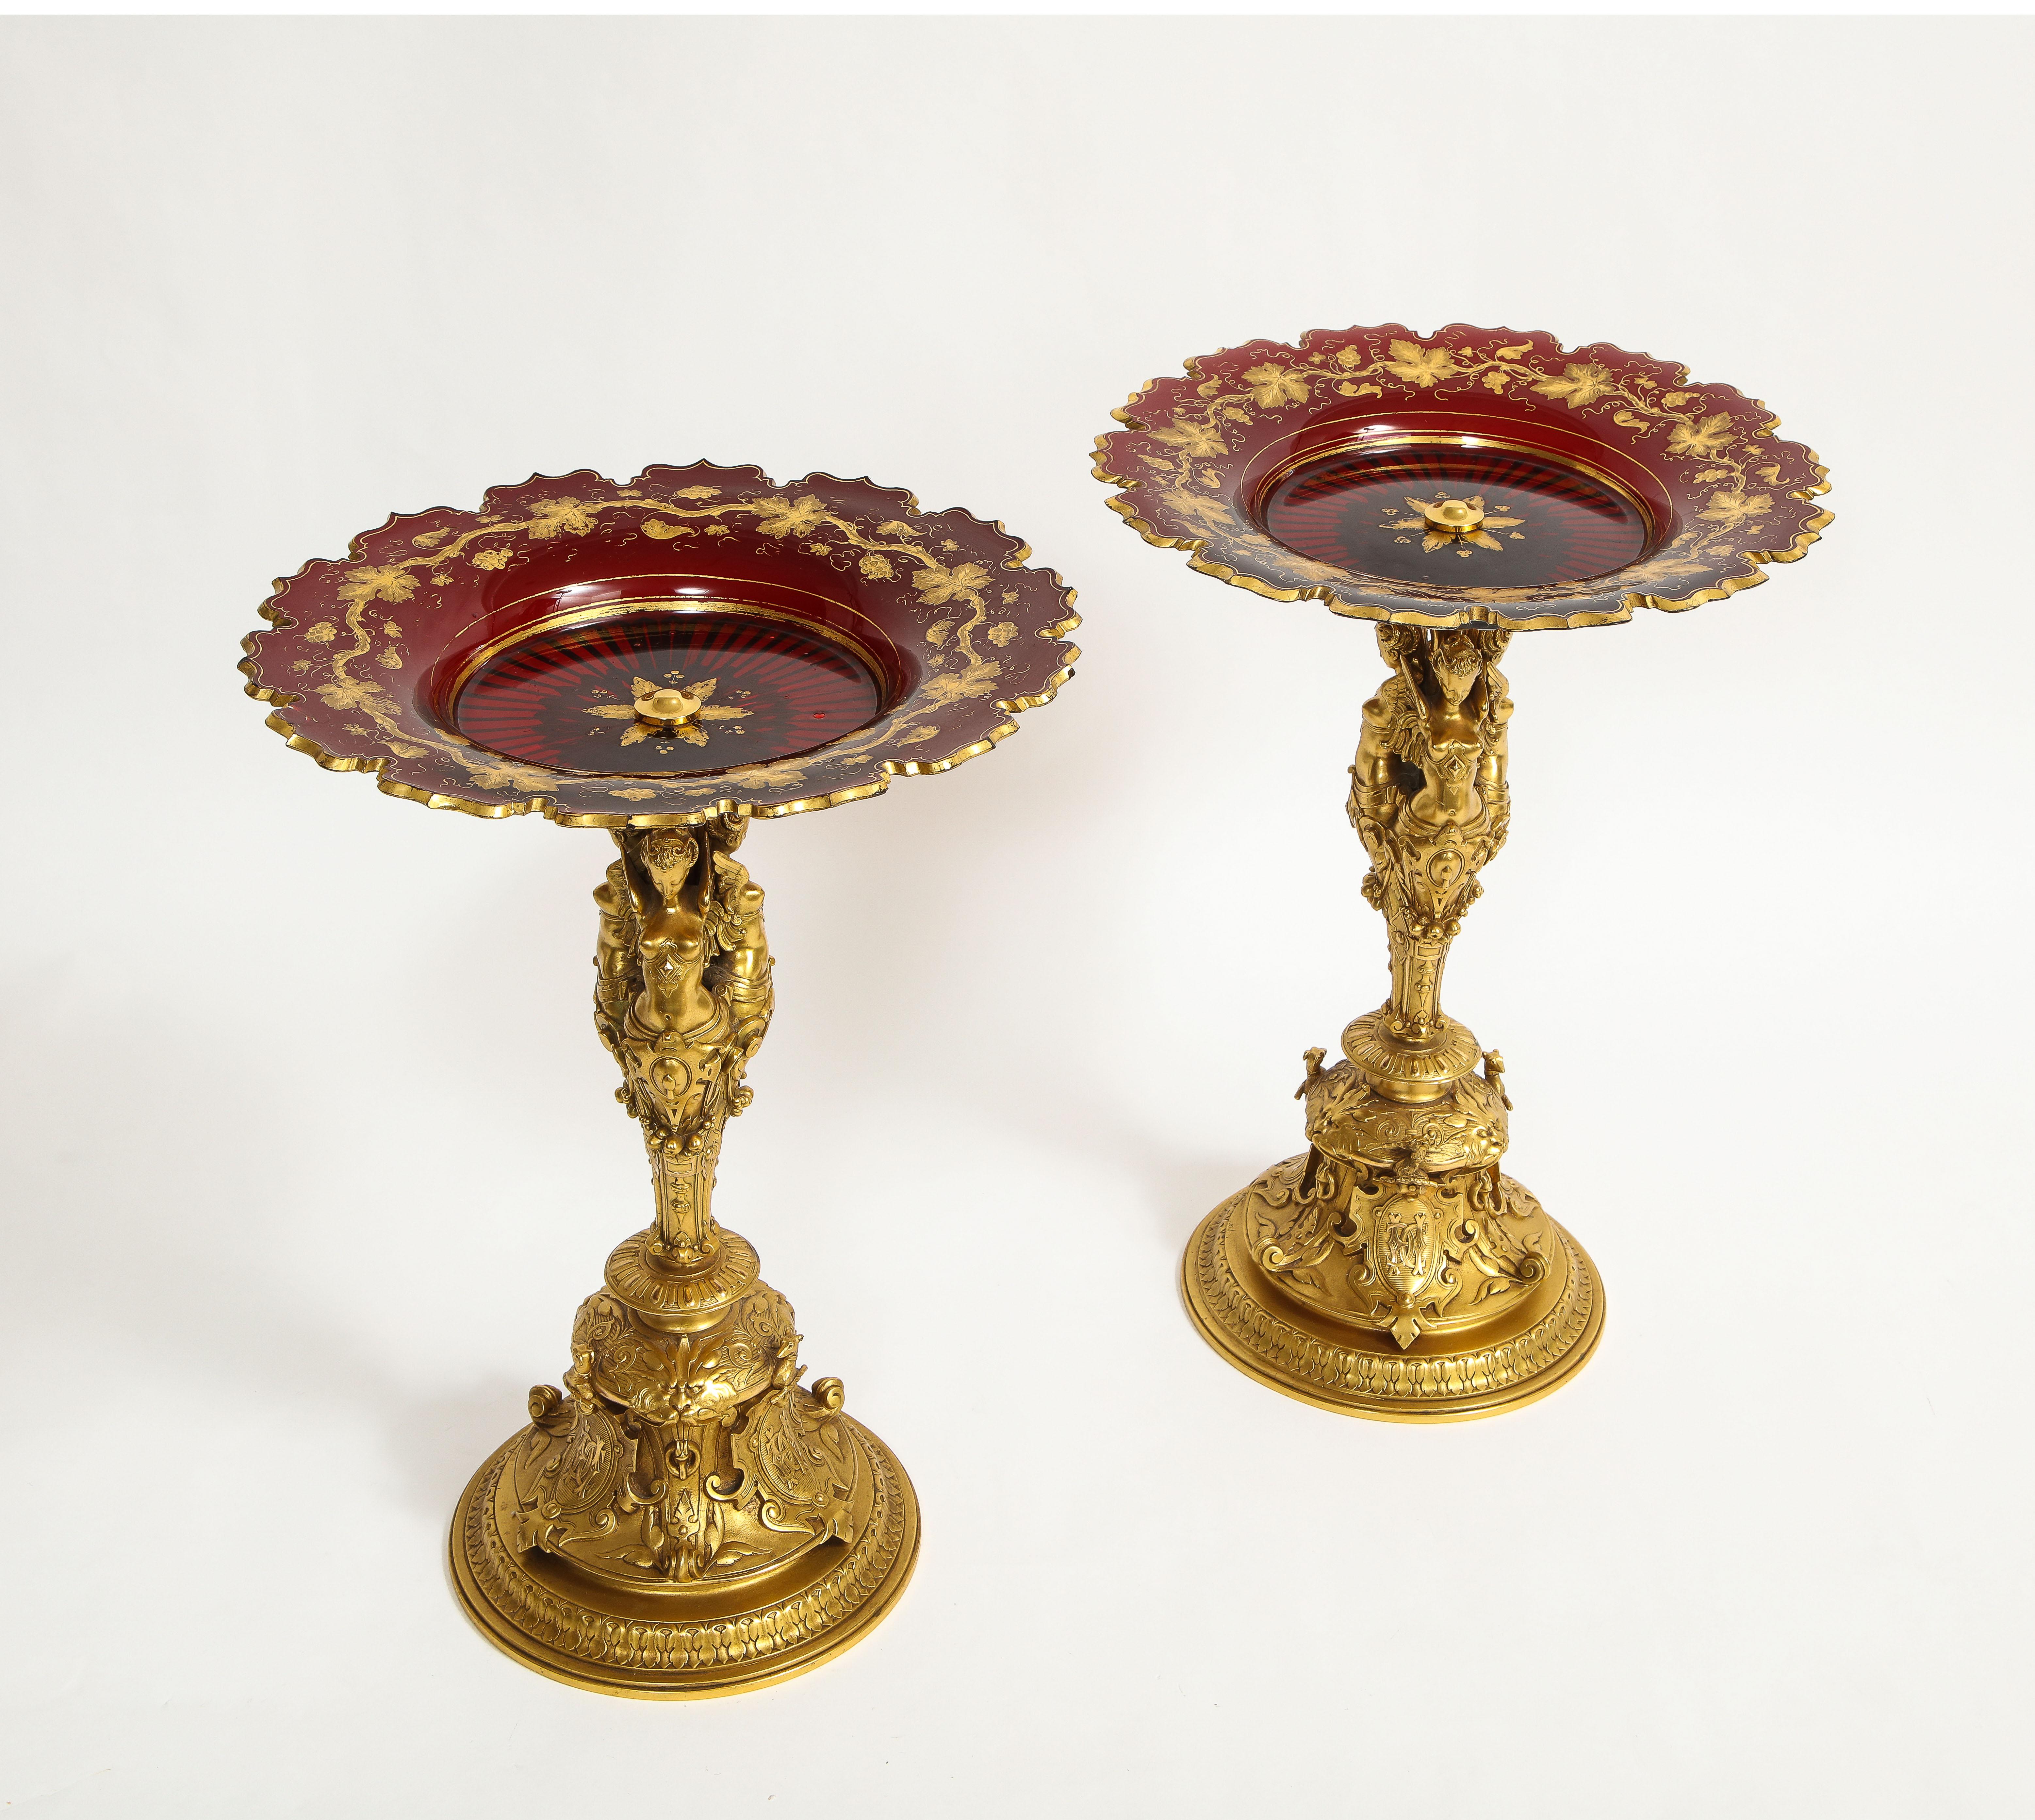 19th Century Pair French 19th C. Louis XVI Style Red Baccarat Crystal Ormolu Mounted Tazzas For Sale